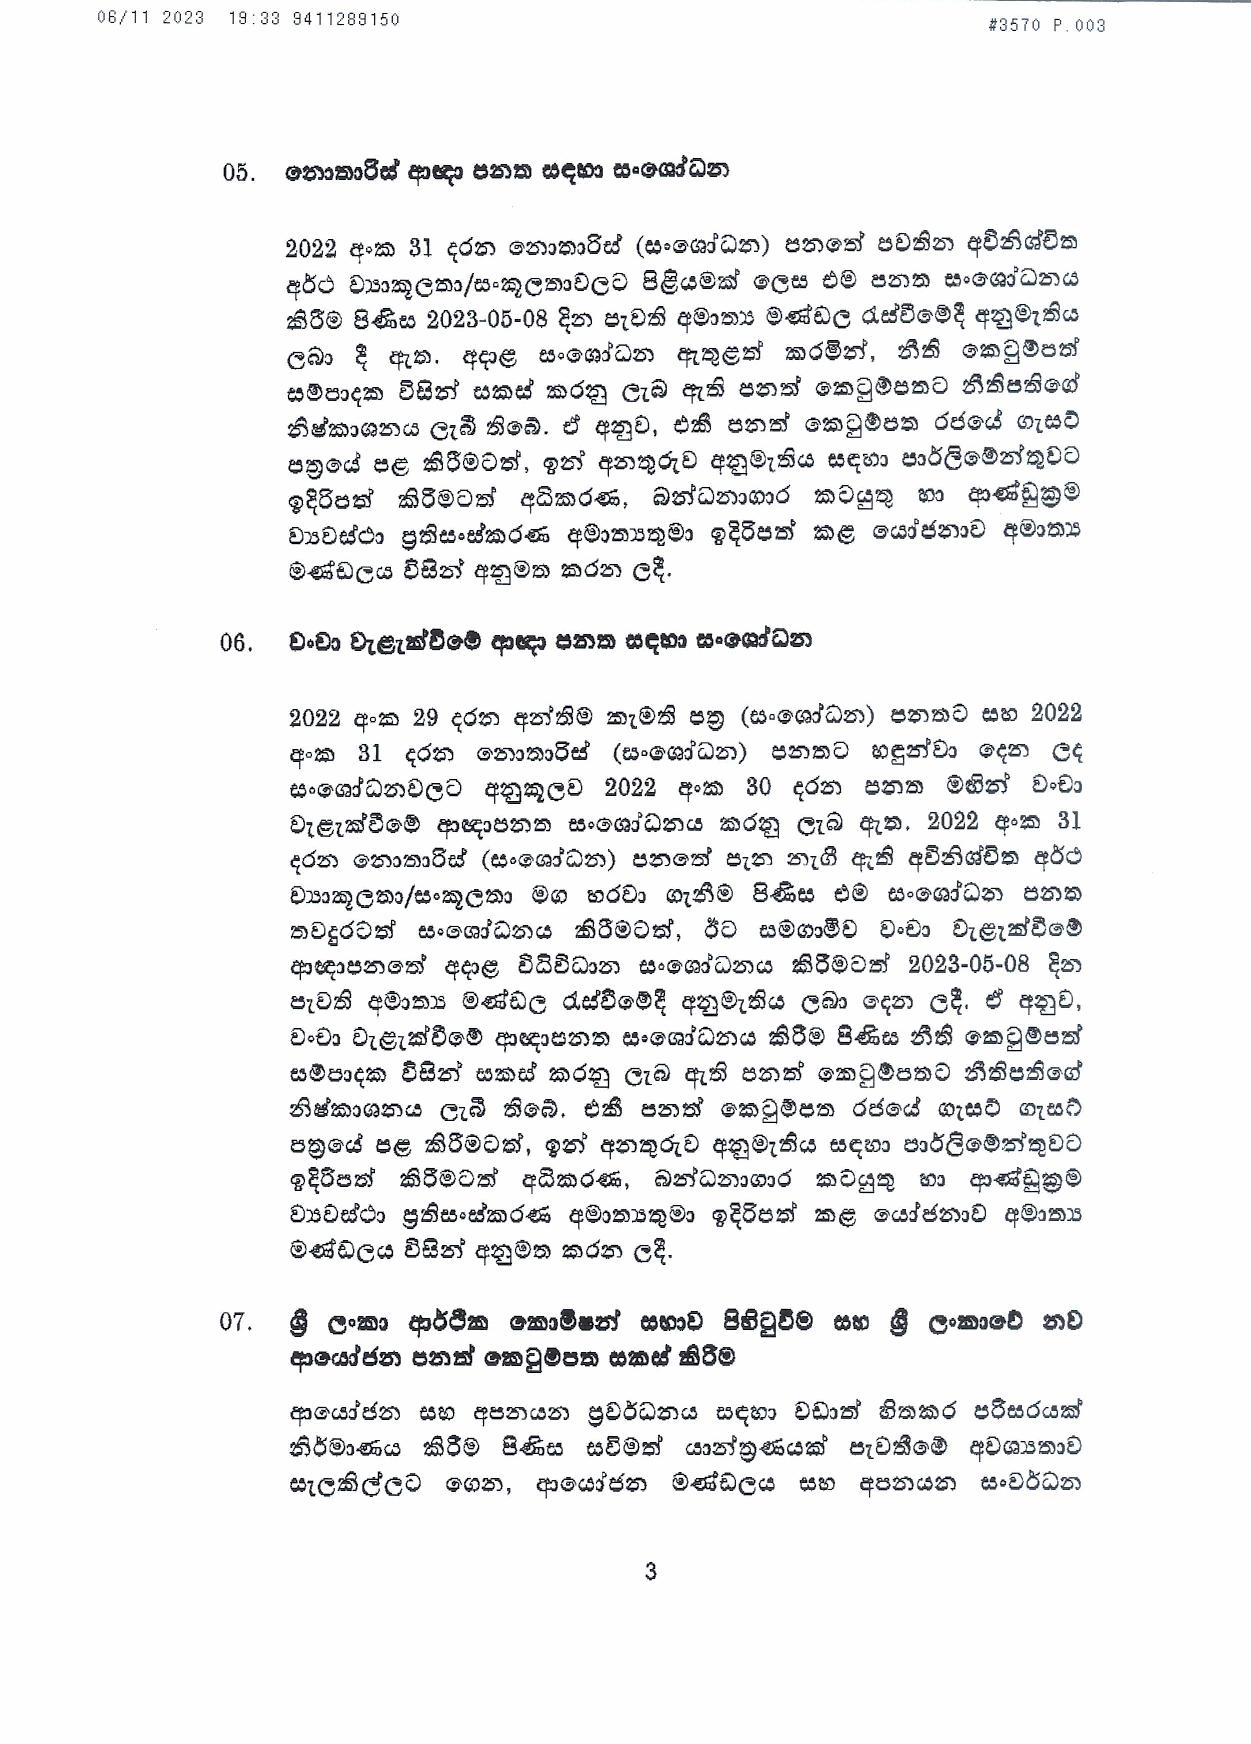 Cabinet Decision on 06.11.2023 page 003